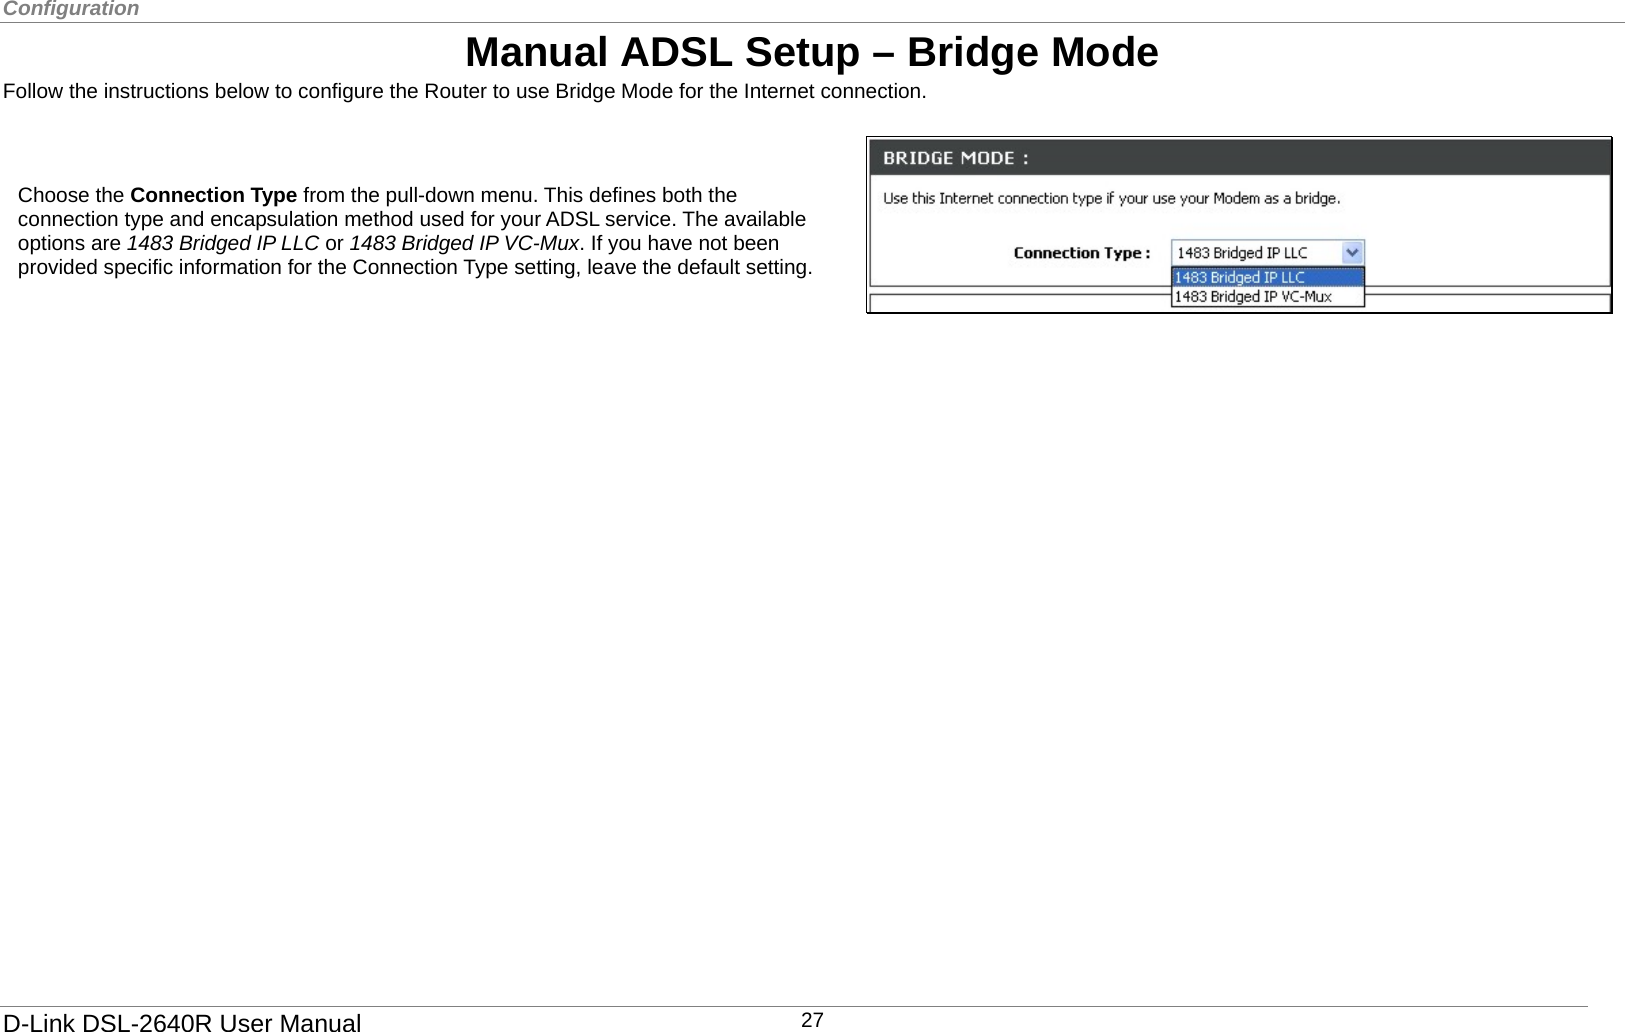 Configuration  Manual ADSL Setup – Bridge Mode Follow the instructions below to configure the Router to use Bridge Mode for the Internet connection.   Setup Wizard To use the Setup Wizard, click the Setup Wizard button and follow the instructions in the pop-up window that appears. The initial window summarizes the setup process. Click the Next button to proceed. You may stop using the Quick Start Wizard at any time by clicking the Exit button. If you exit the wizard you will return to the main Quick Start window without saving any of the settings changed during the process.  Choose the Connection Type from the pull-down menu. This defines both the connection type and encapsulation method used for your ADSL service. The available options are 1483 Bridged IP LLC or 1483 Bridged IP VC-Mux. If you have not been provided specific information for the Connection Type setting, leave the default setting.       D-Link DSL-2640R User Manual 27